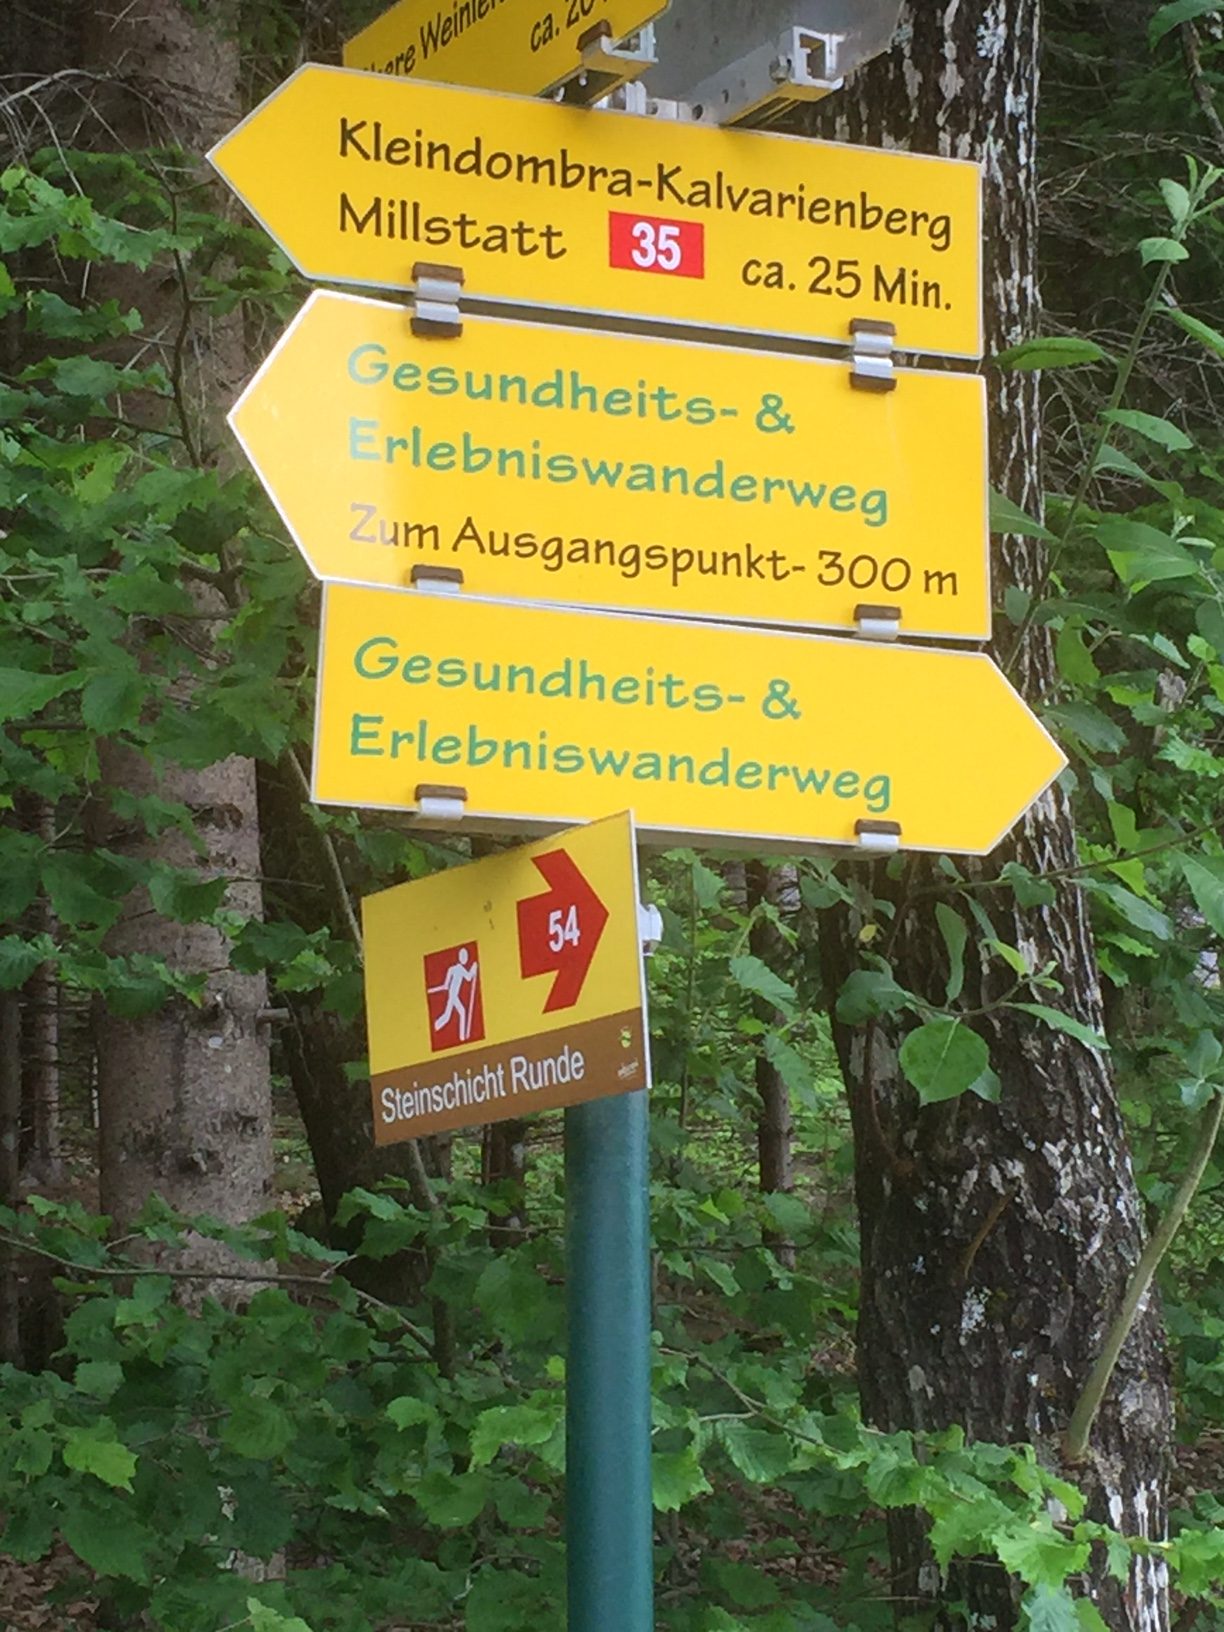 Austria: Walking made easy. And safe.